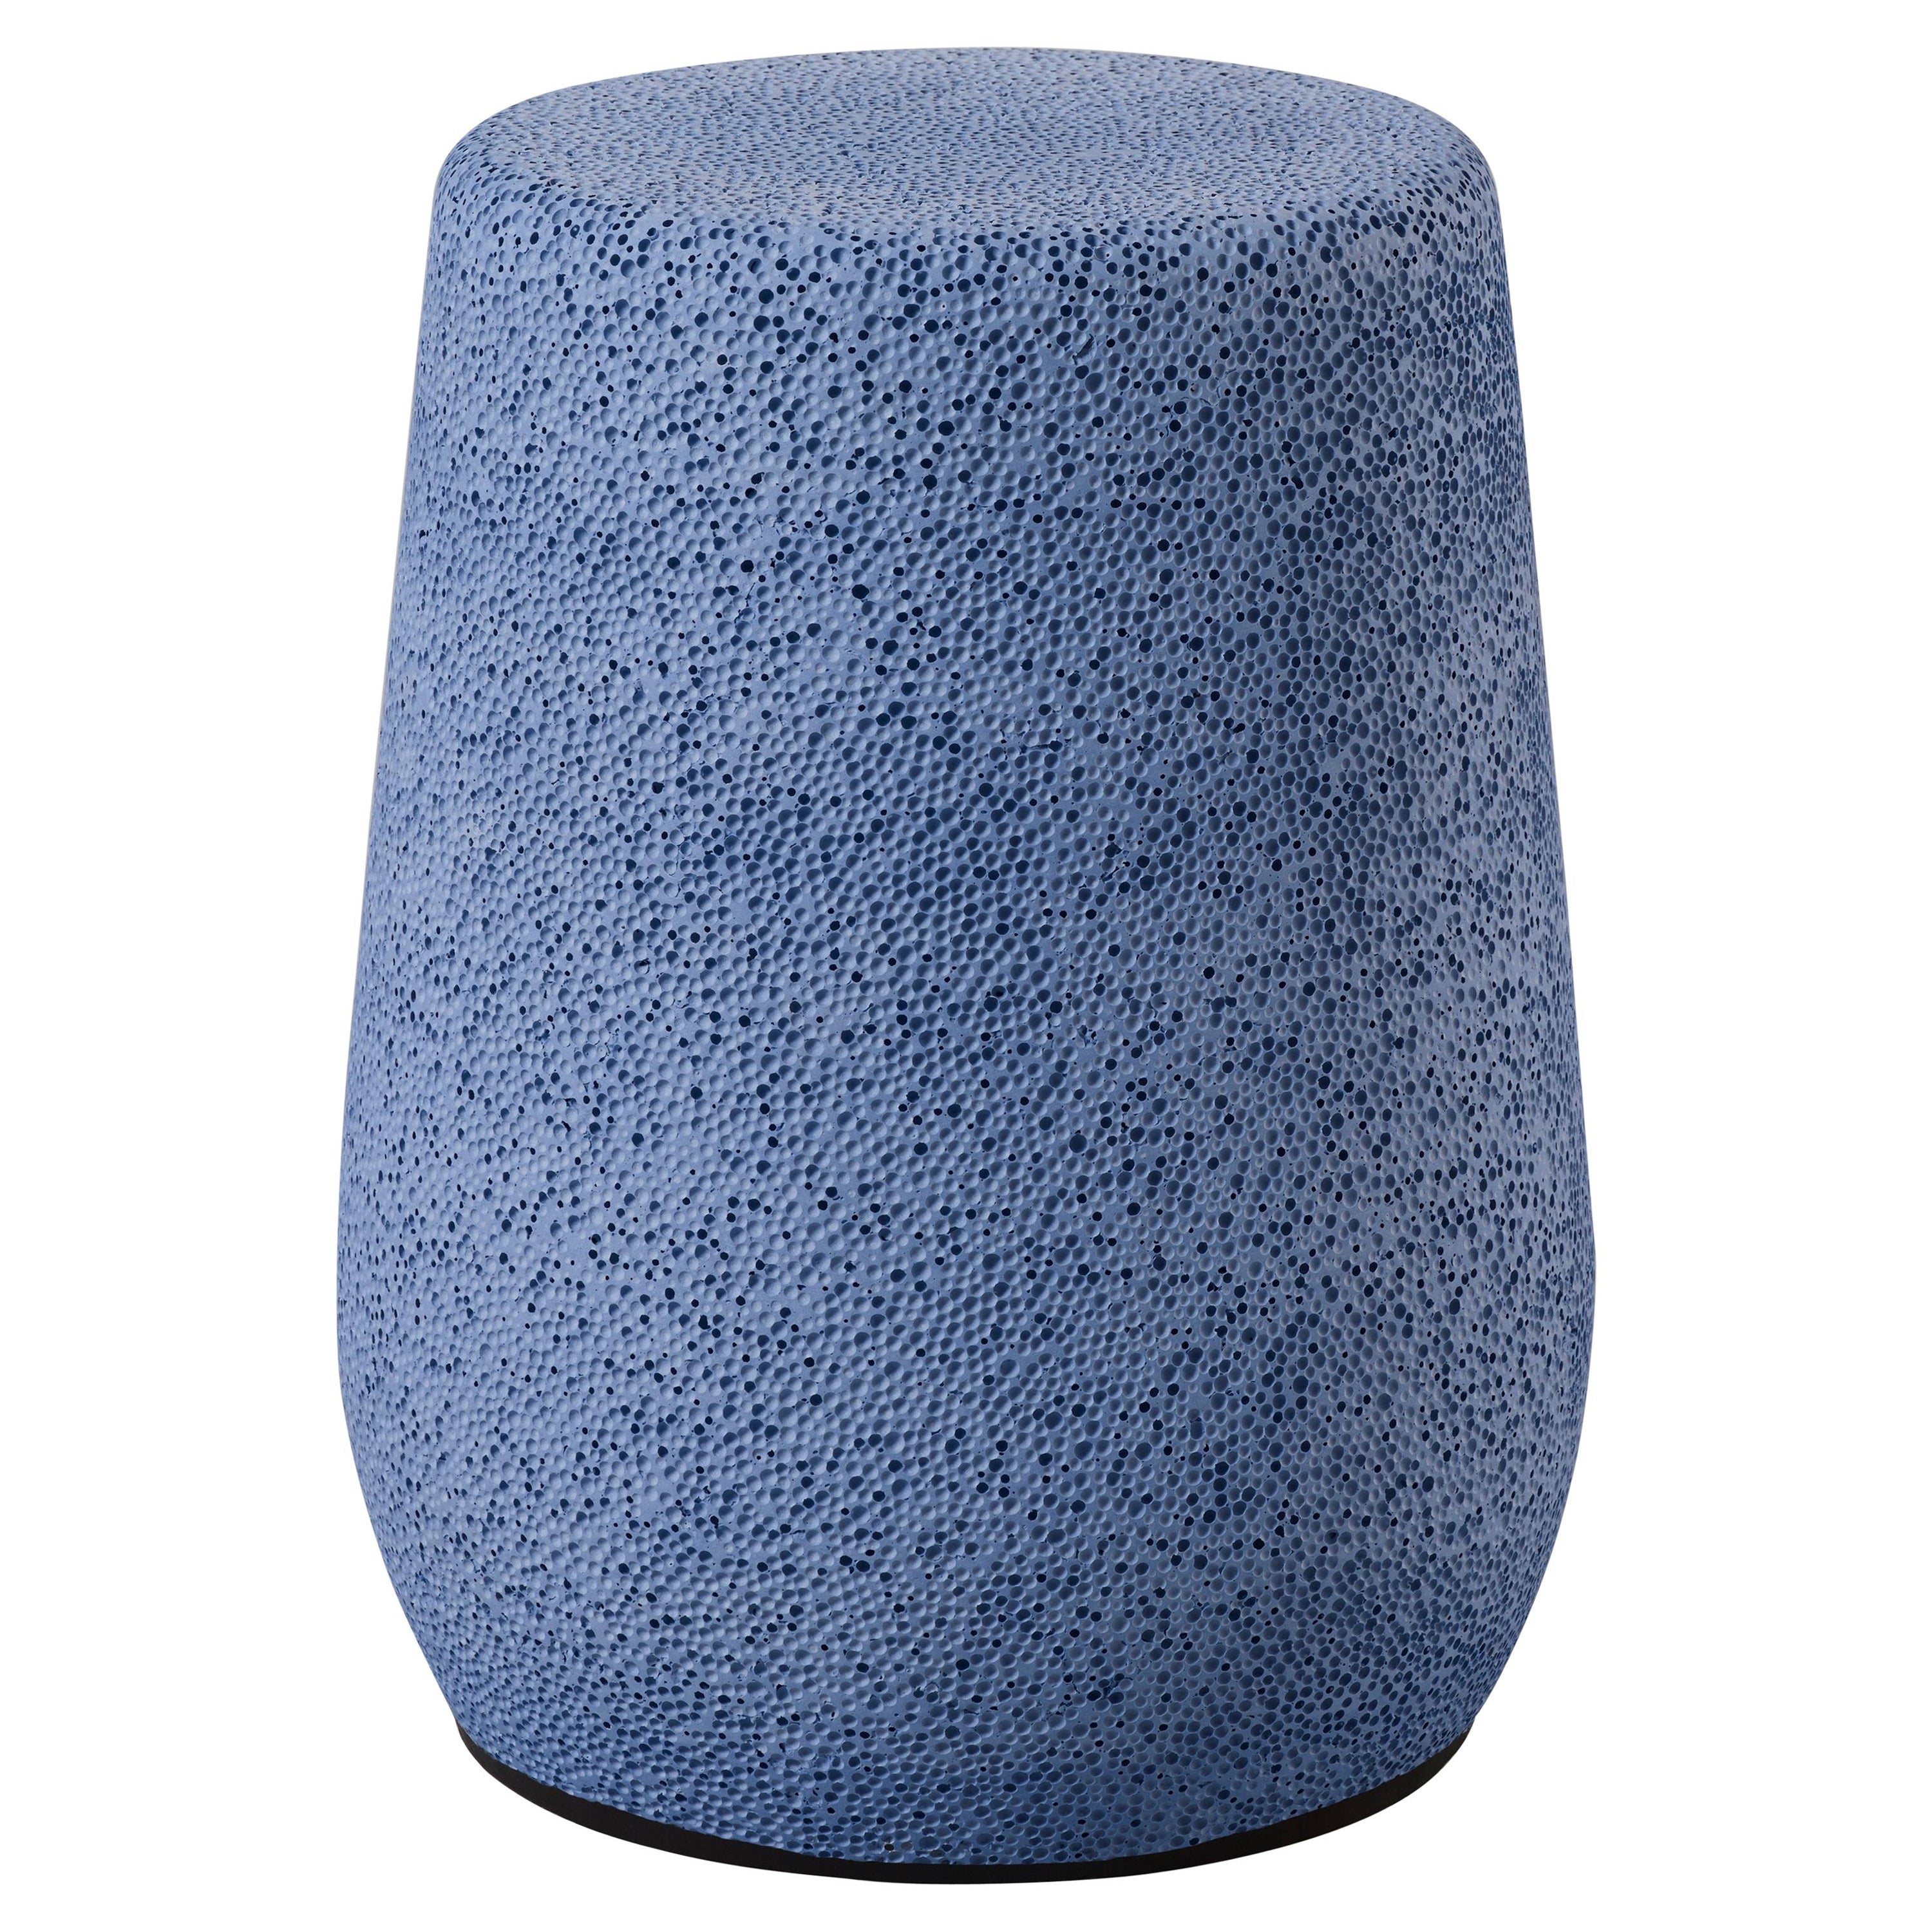 'Lightweight Porcelain' Stool and Side Table by Djim Berger - Dark Blue For Sale